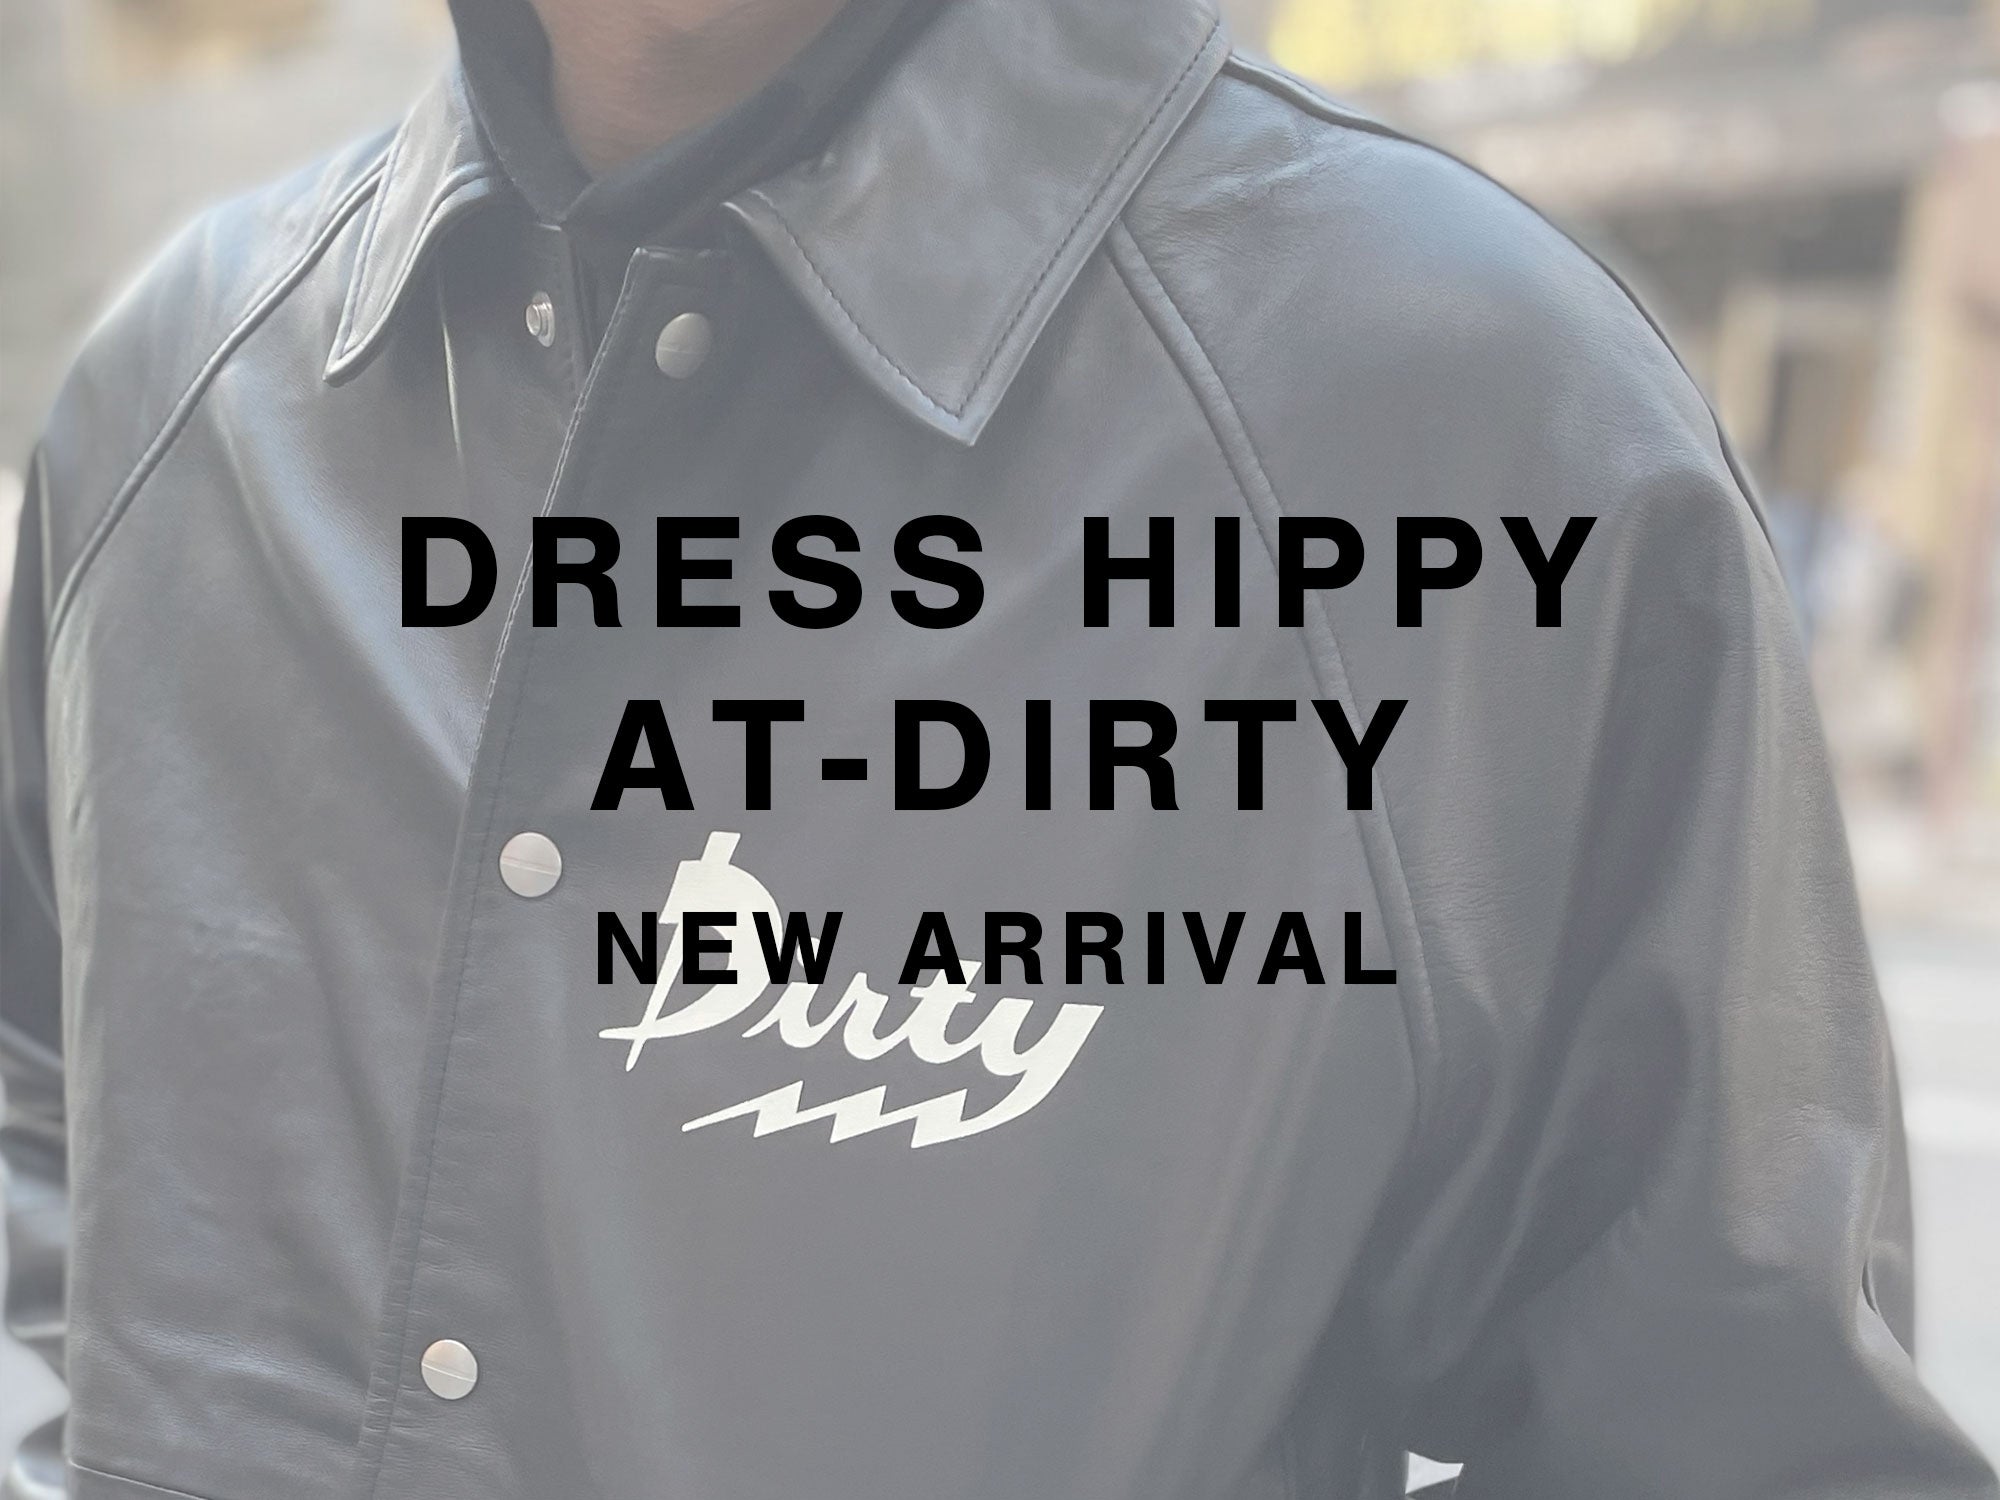 DRESS HIPPY, AT-DIRTY NEW ARRIVAL ドレスヒッピー アット